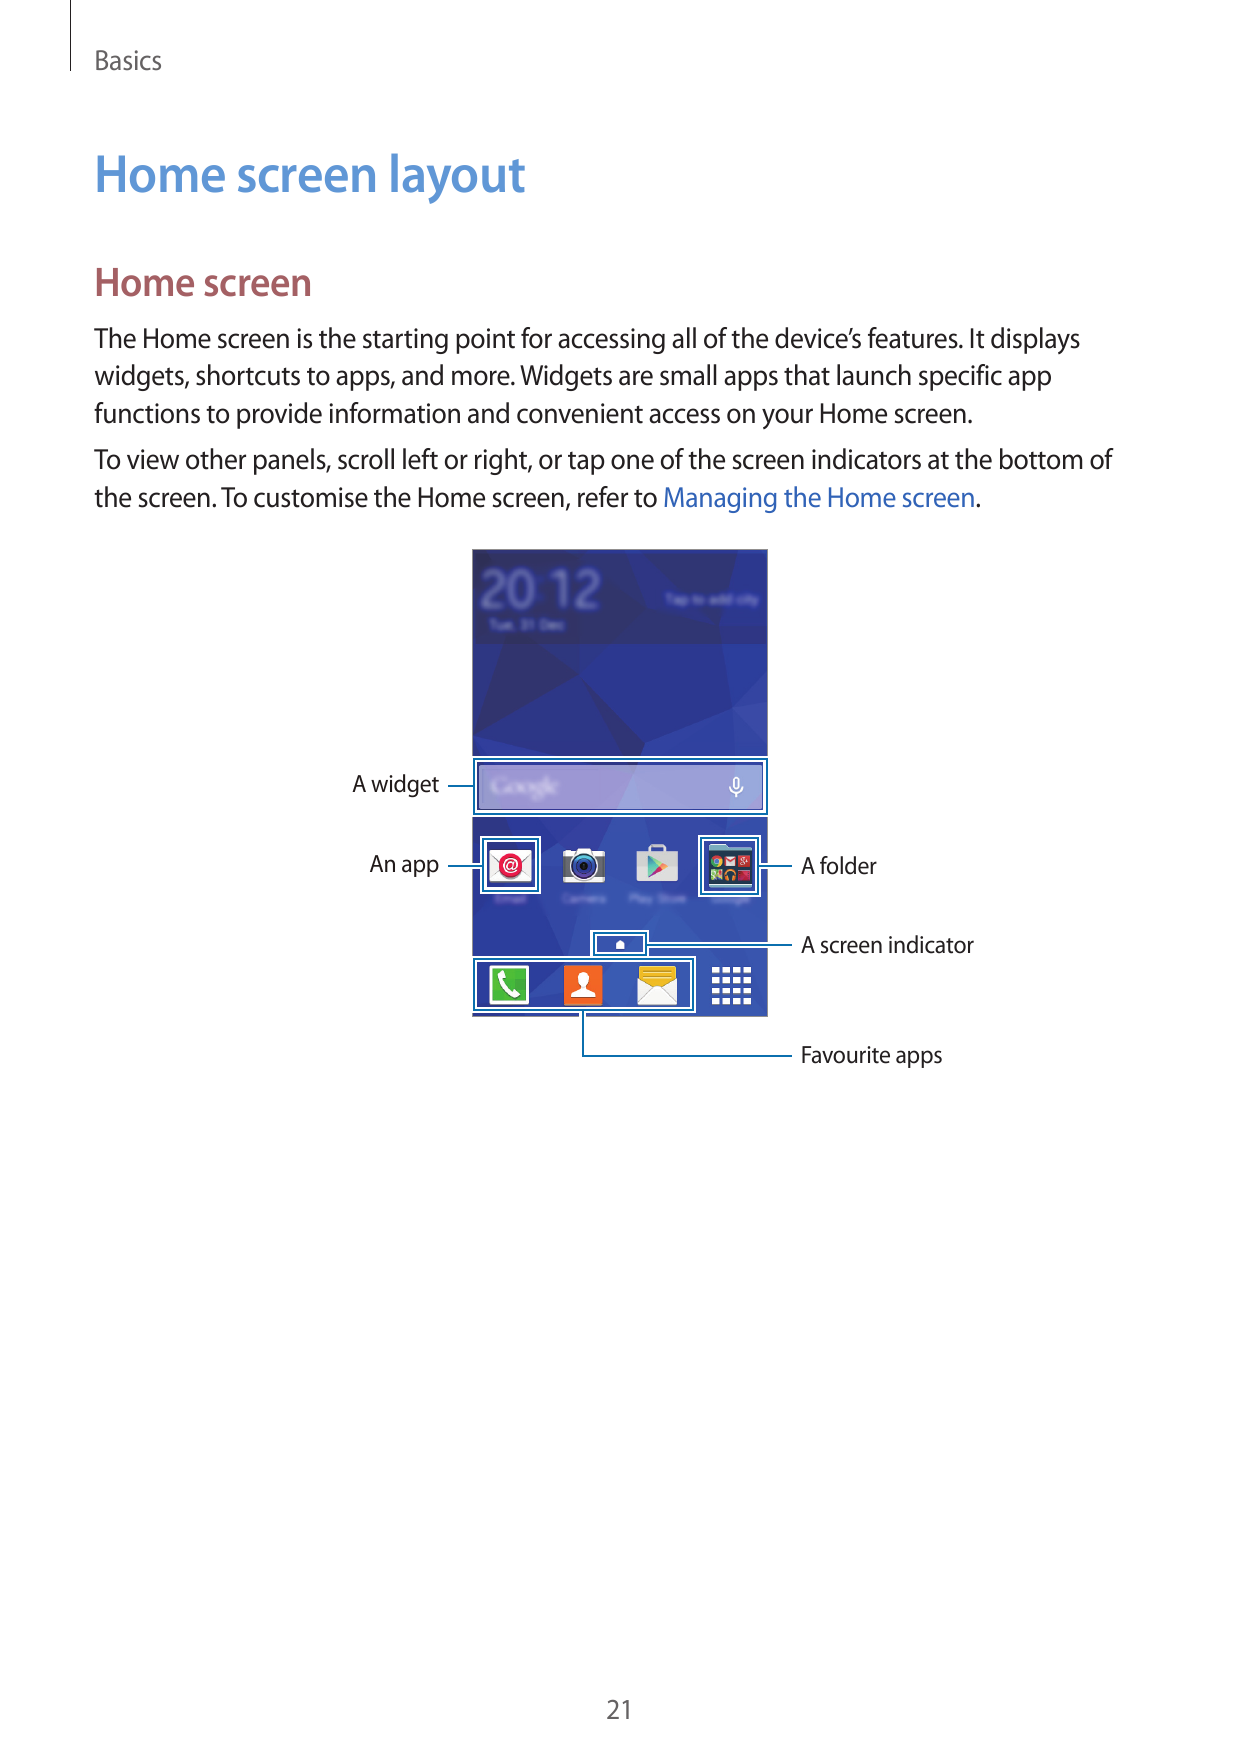 BasicsHome screen layoutHome screenThe Home screen is the starting point for accessing all of the device’s features. It displays